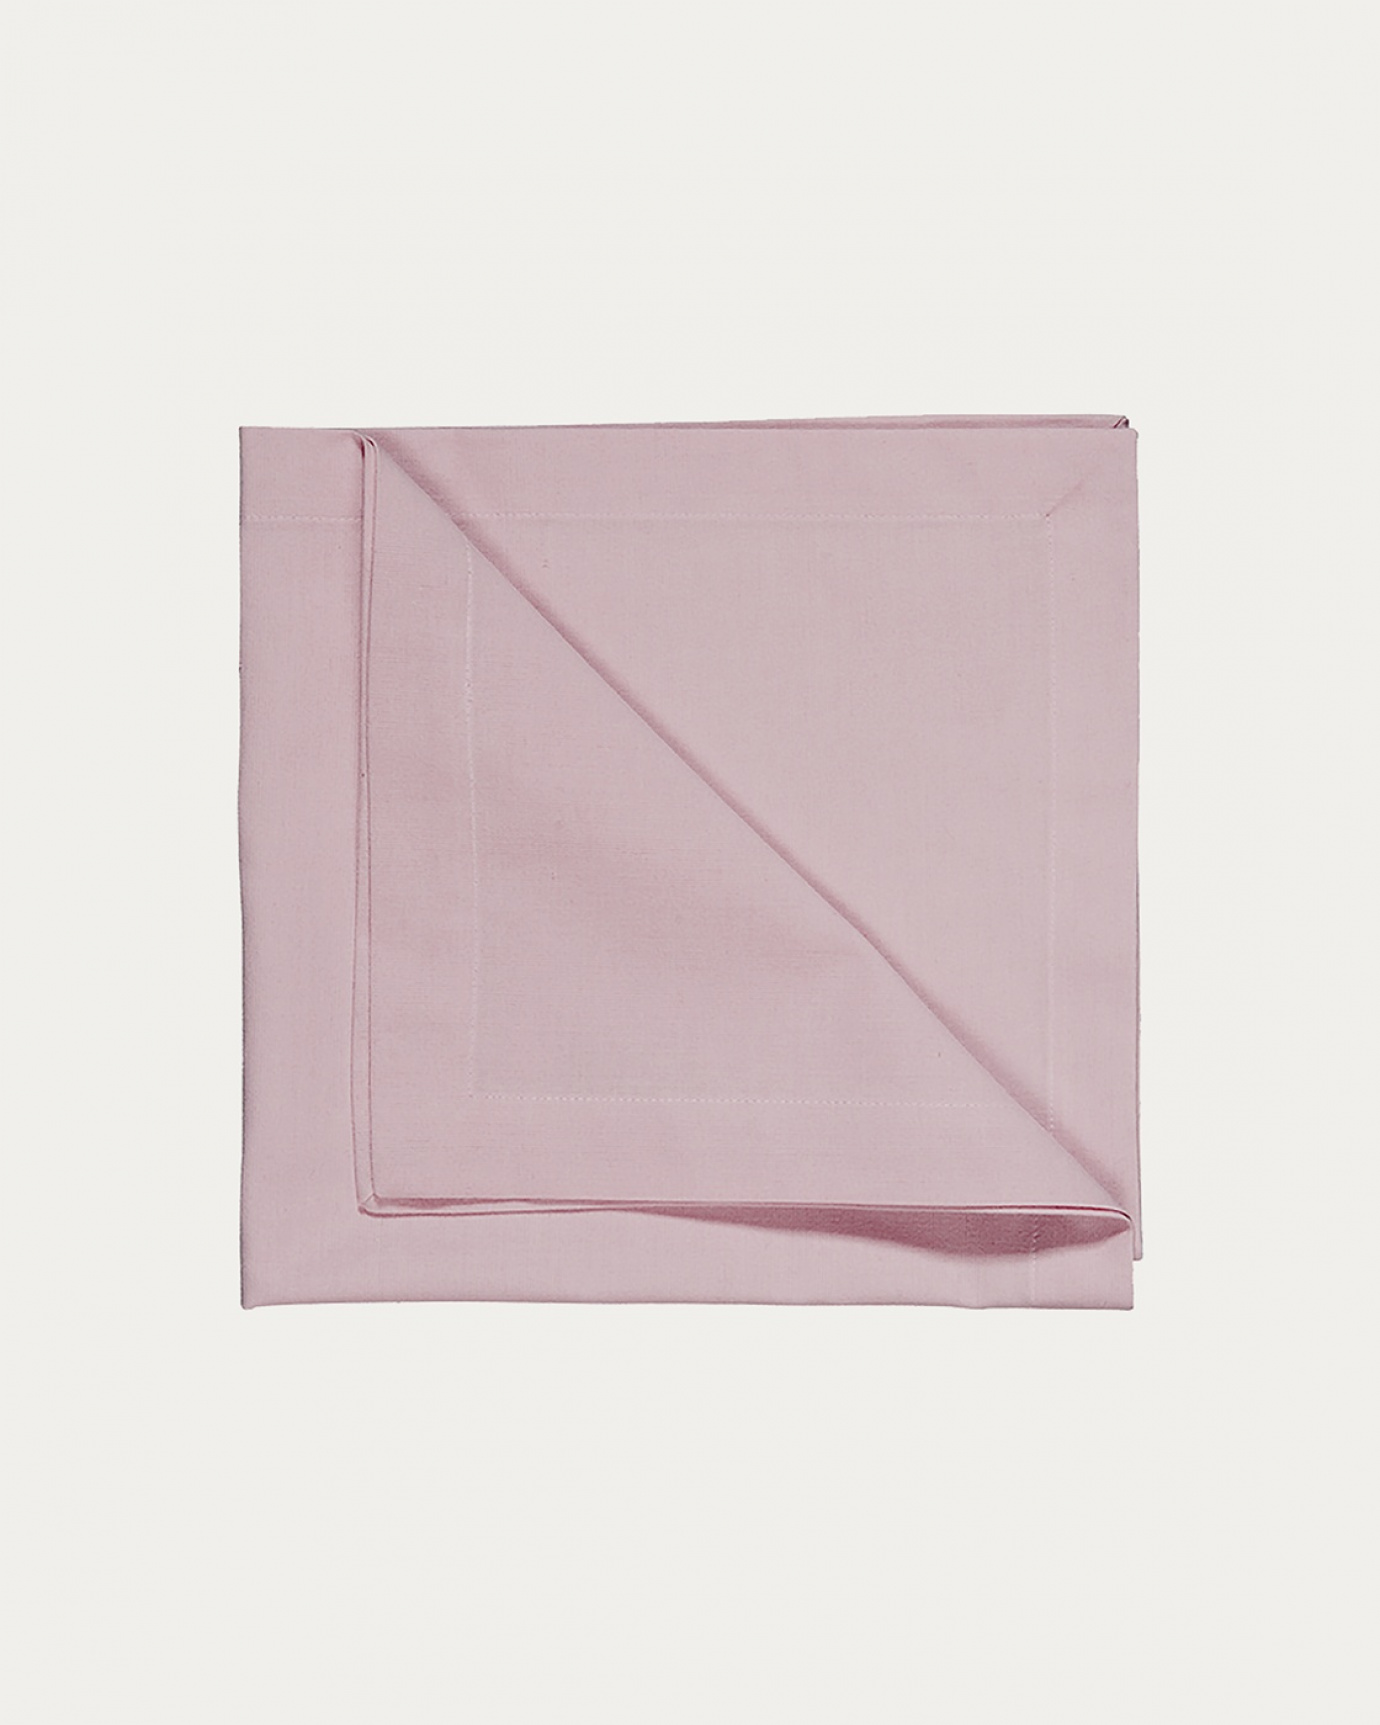 Product image light pink ROBERT napkin made of soft cotton from LINUM DESIGN. Size 45x45 cm and sold in 4-pack.